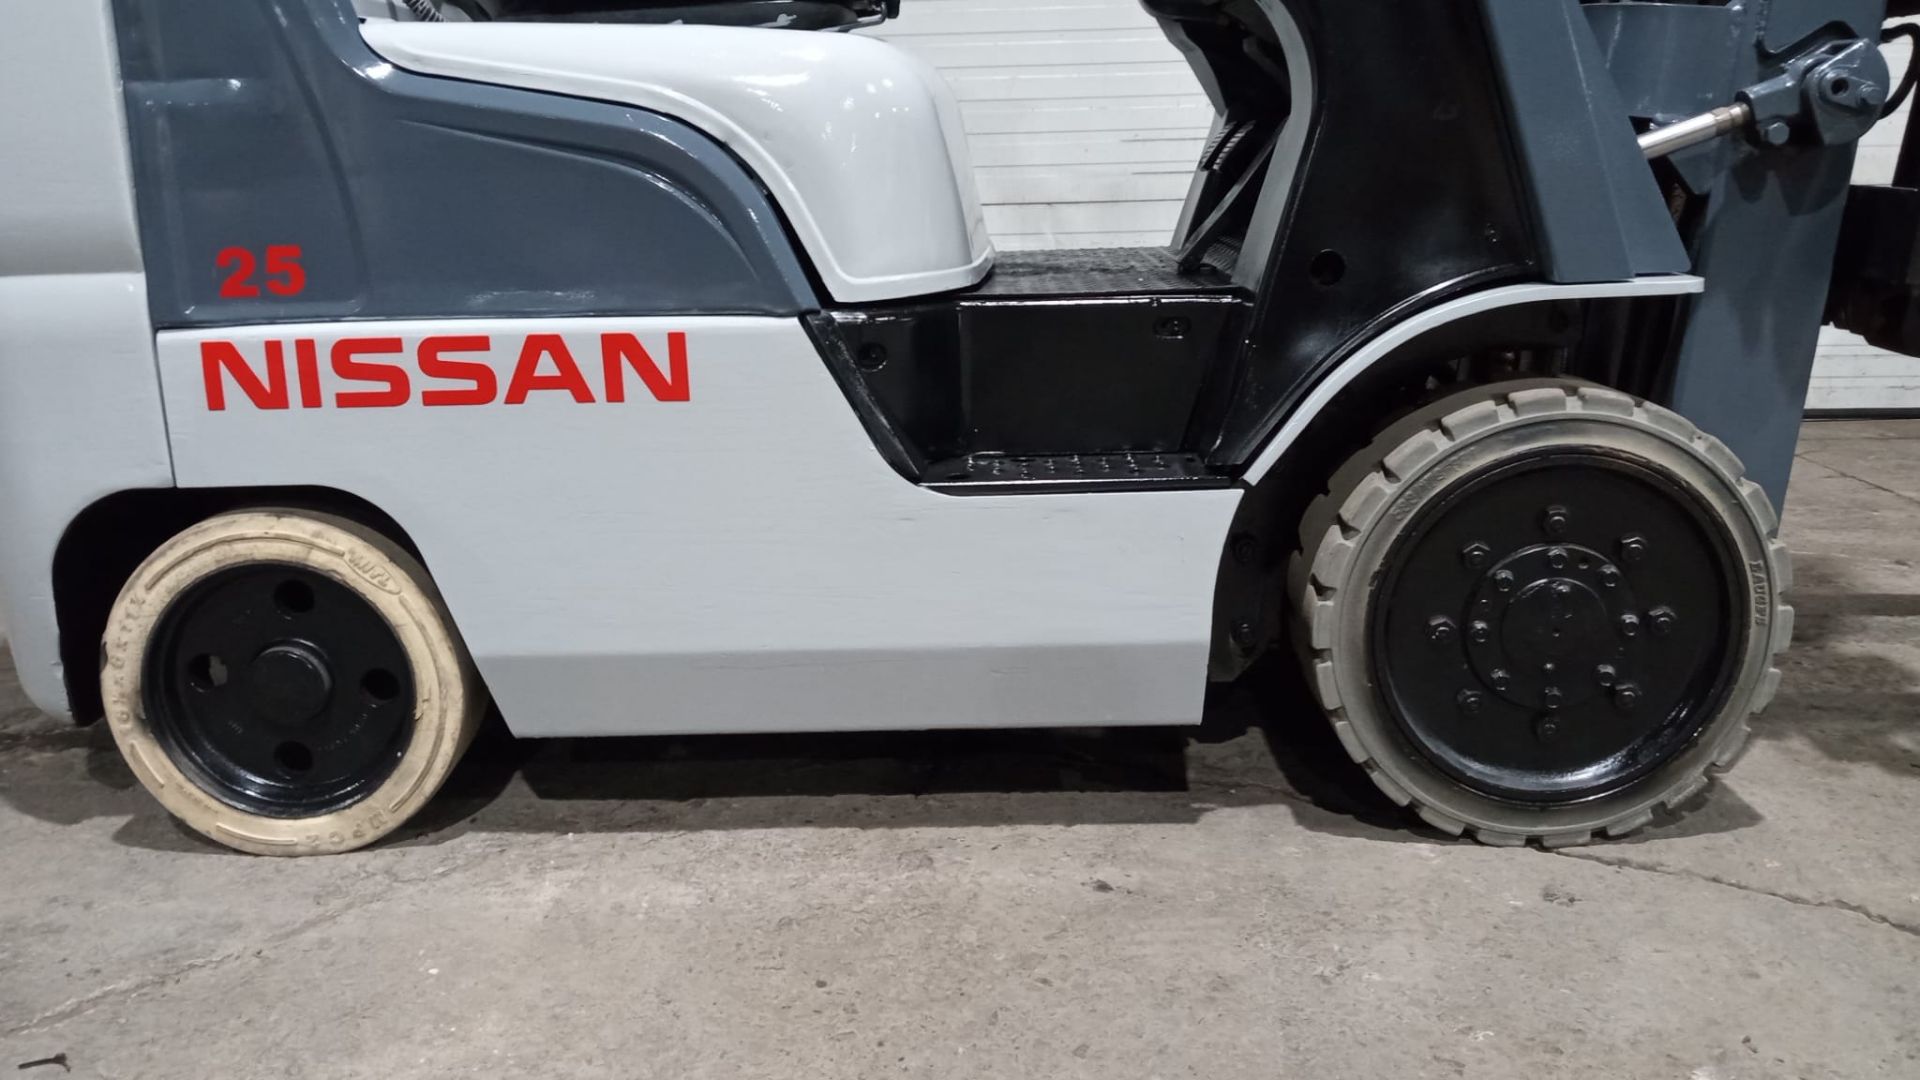 Nissan 5,000 Capacity Forklift LPG (Propane) with Sideshift and 3-STAGE MAST non-marking tires (no - Image 3 of 6